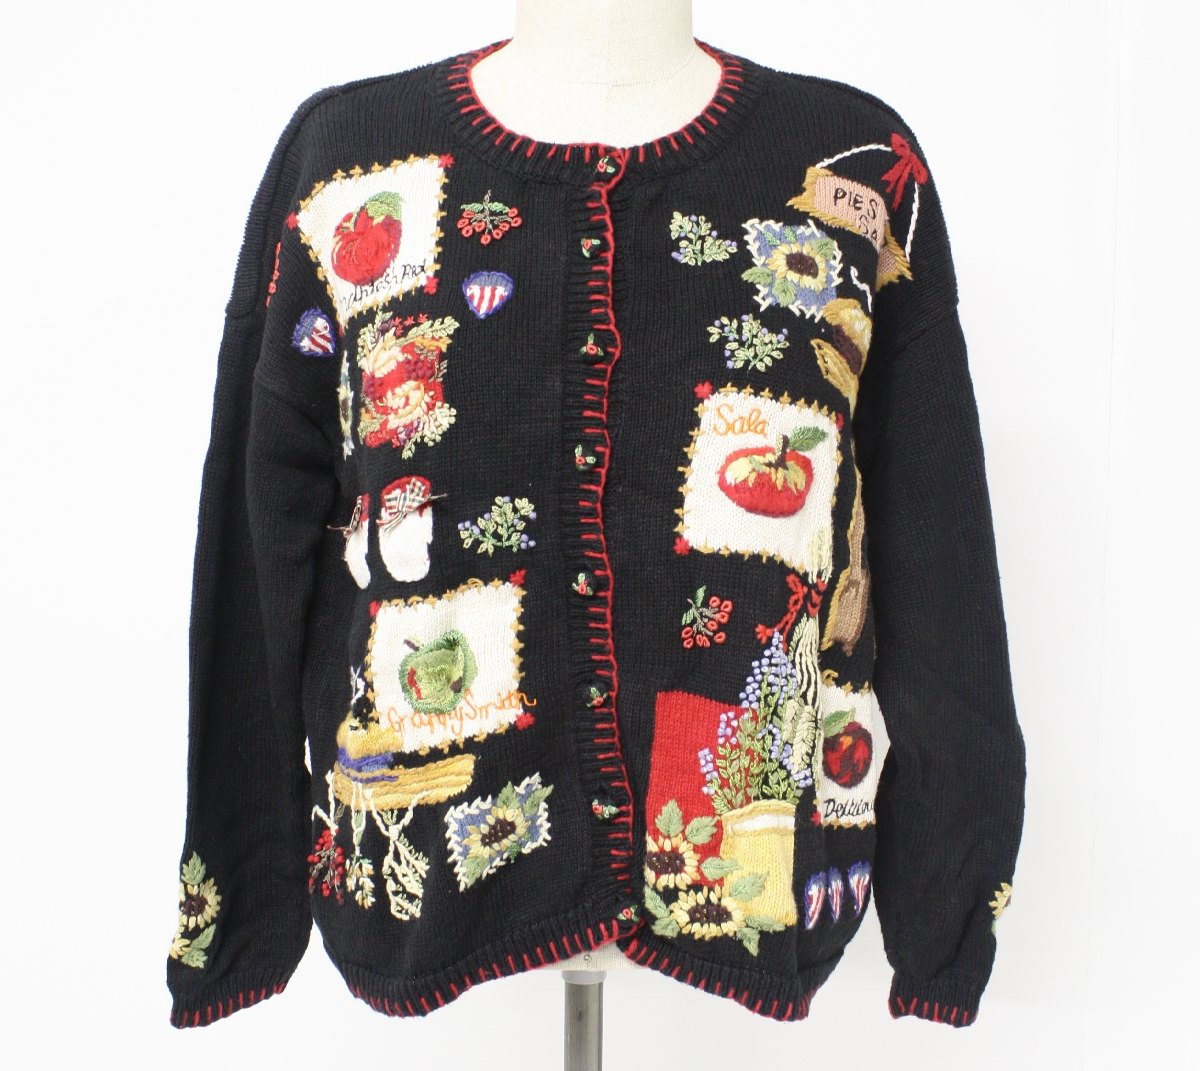 Excel Opmærksom diamant Womens Ugly Non-Christmas Sweater: -Heirloom Collectibles- Womens black,  red, blue, yellow, green, brown, purple, white, and orange ramie and cotton  longsleeve button up ugly sweater with apples, flowers, pies, and spoons.  Want